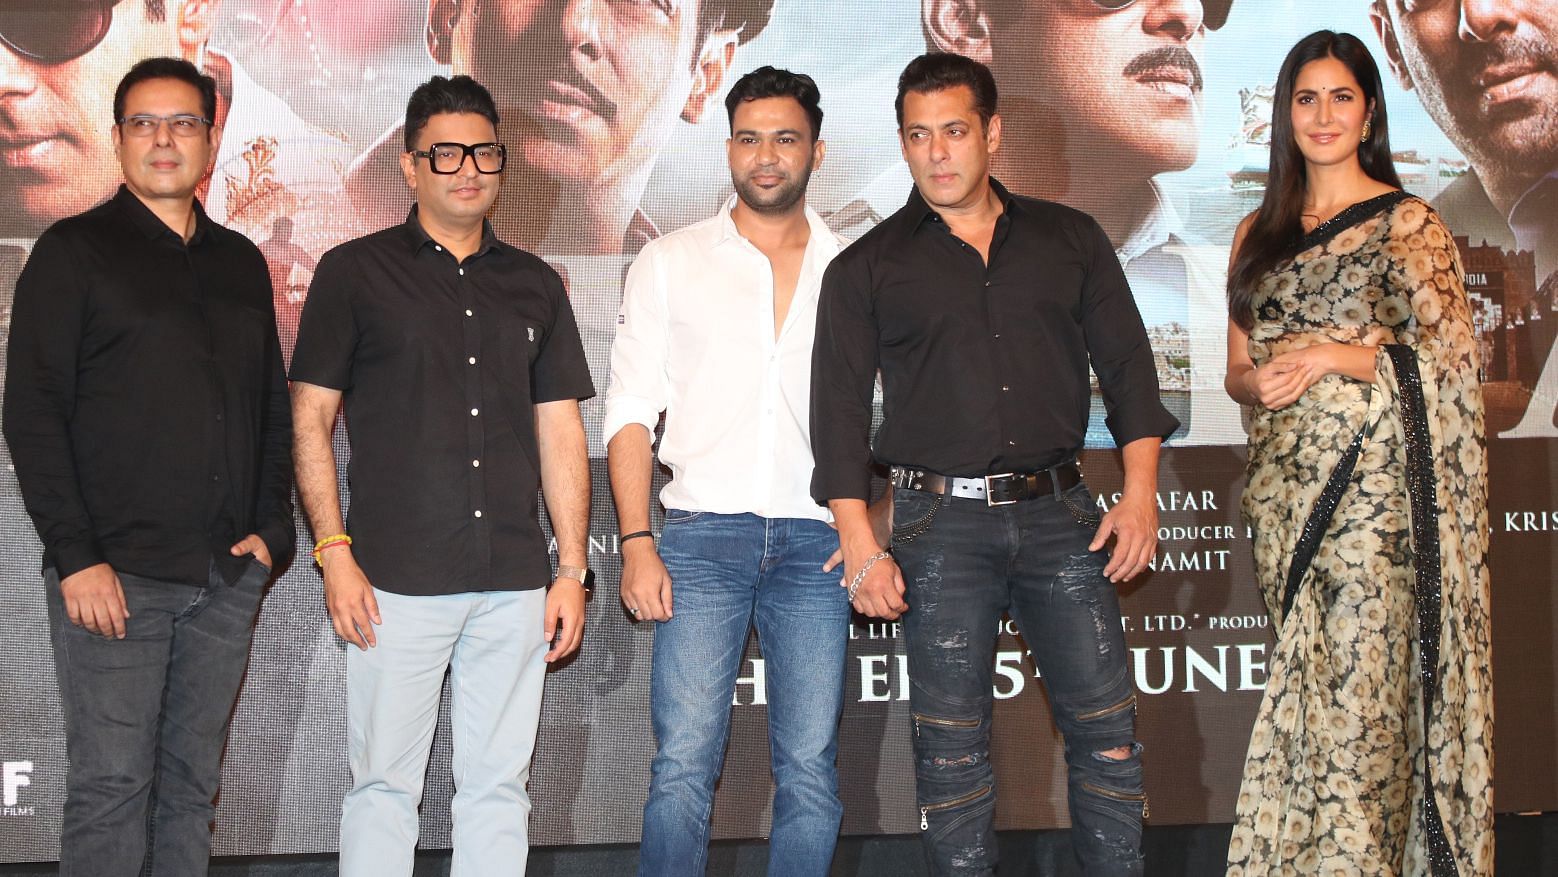 The team of Bharat at Zinda song launch.